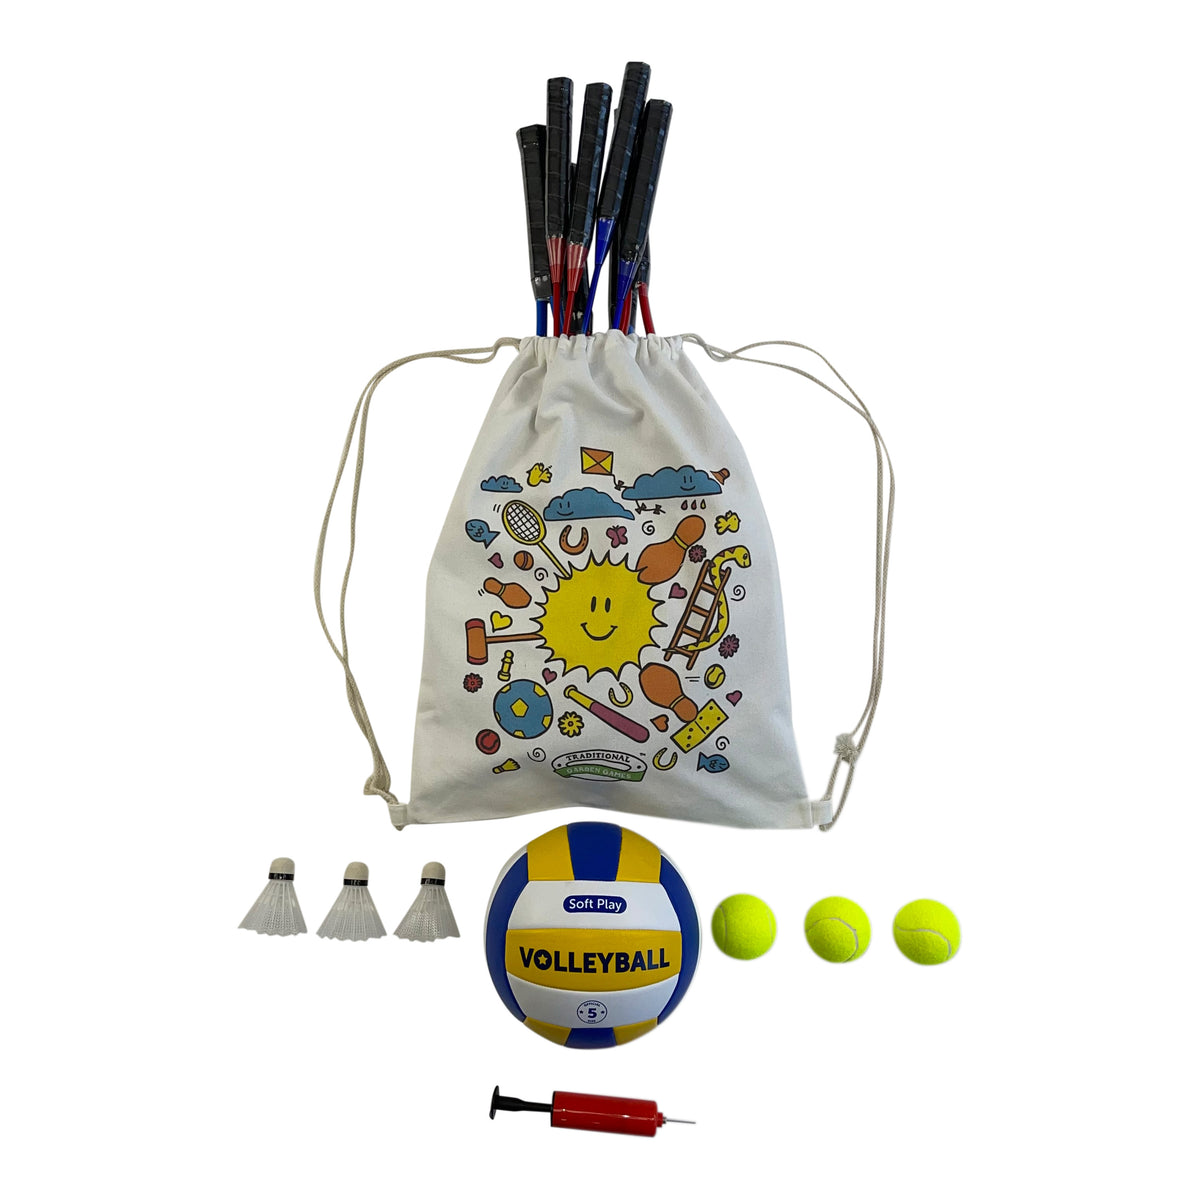 4 Player 3 in 1 Badminton Volley Ball Tennis Set with 6m Net